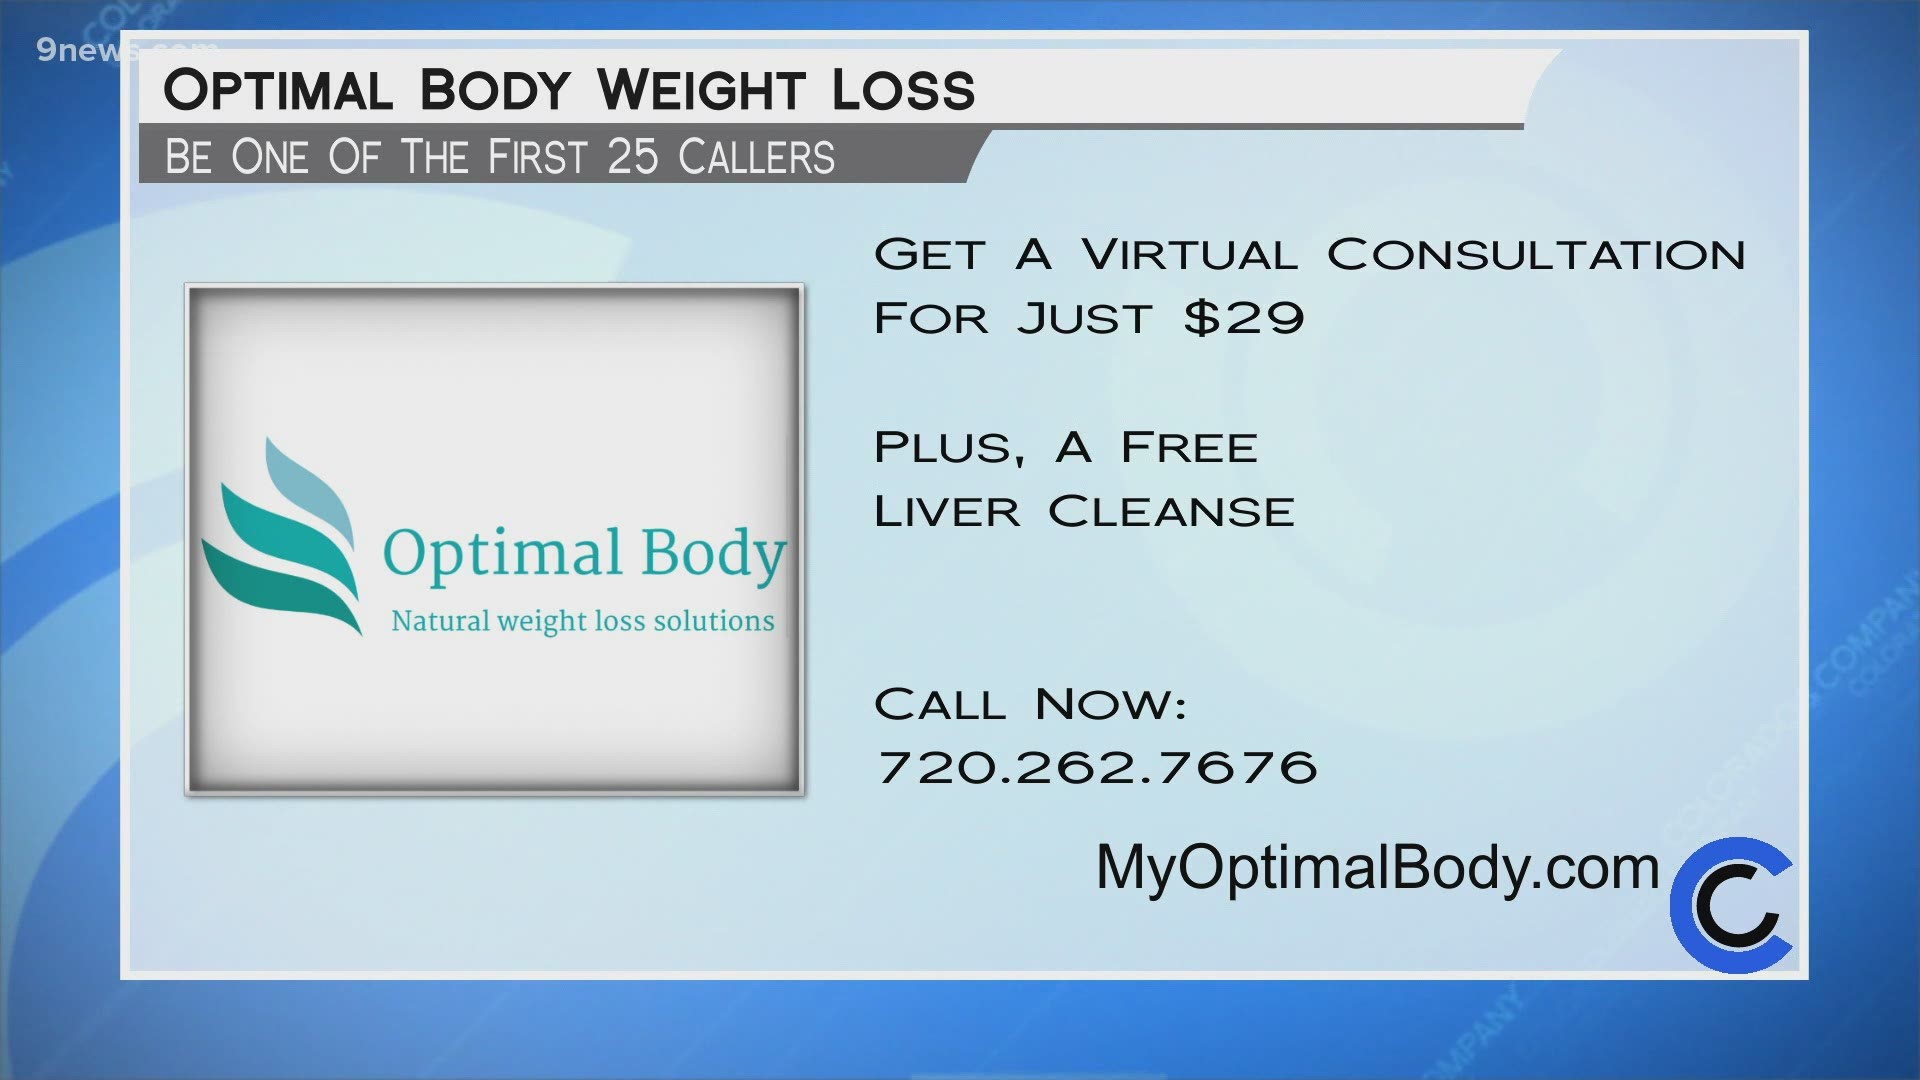 The first 25 callers to 720.262.7676 can schedule a weight loss consultation for only $29 and a free liver cleanse to get started. Learn more at MyOptimalBody.com.